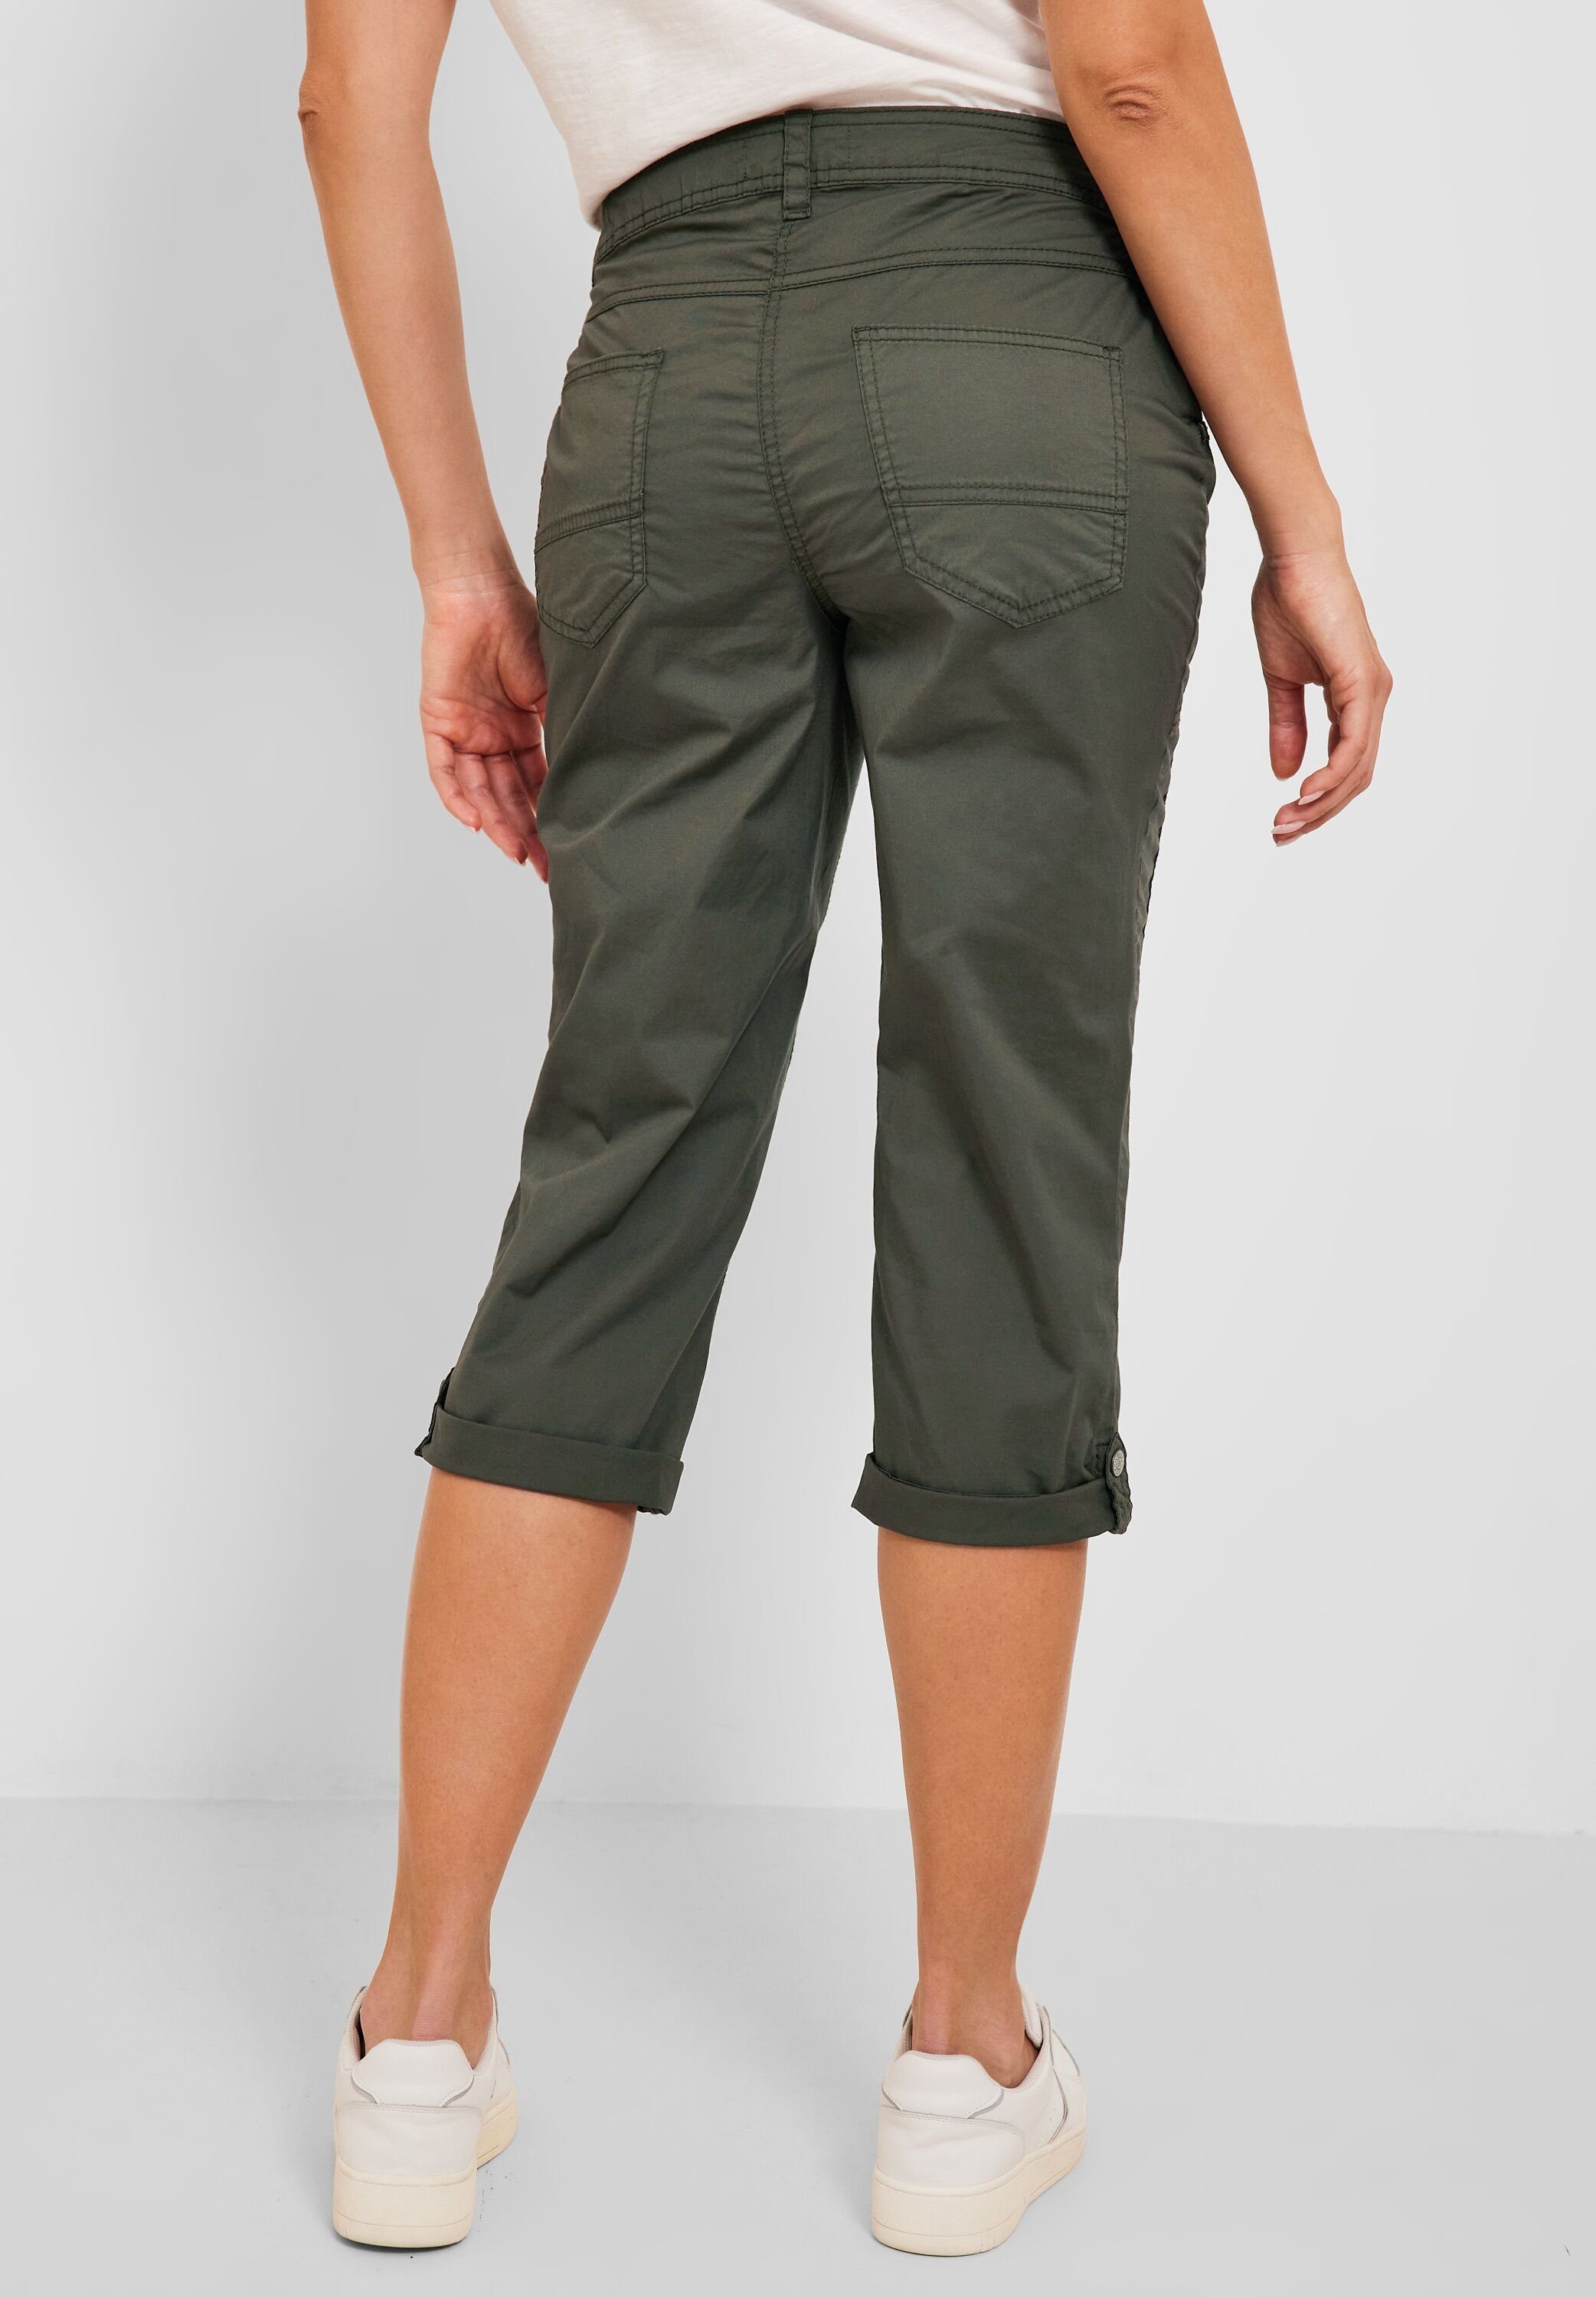 Turn-Up mit Utility in Fit Five Olive Funktion Pockets, Cecil 3/4-Hose 3/4 Cecil (1-tlg) in Beinabschluss Hose Casual